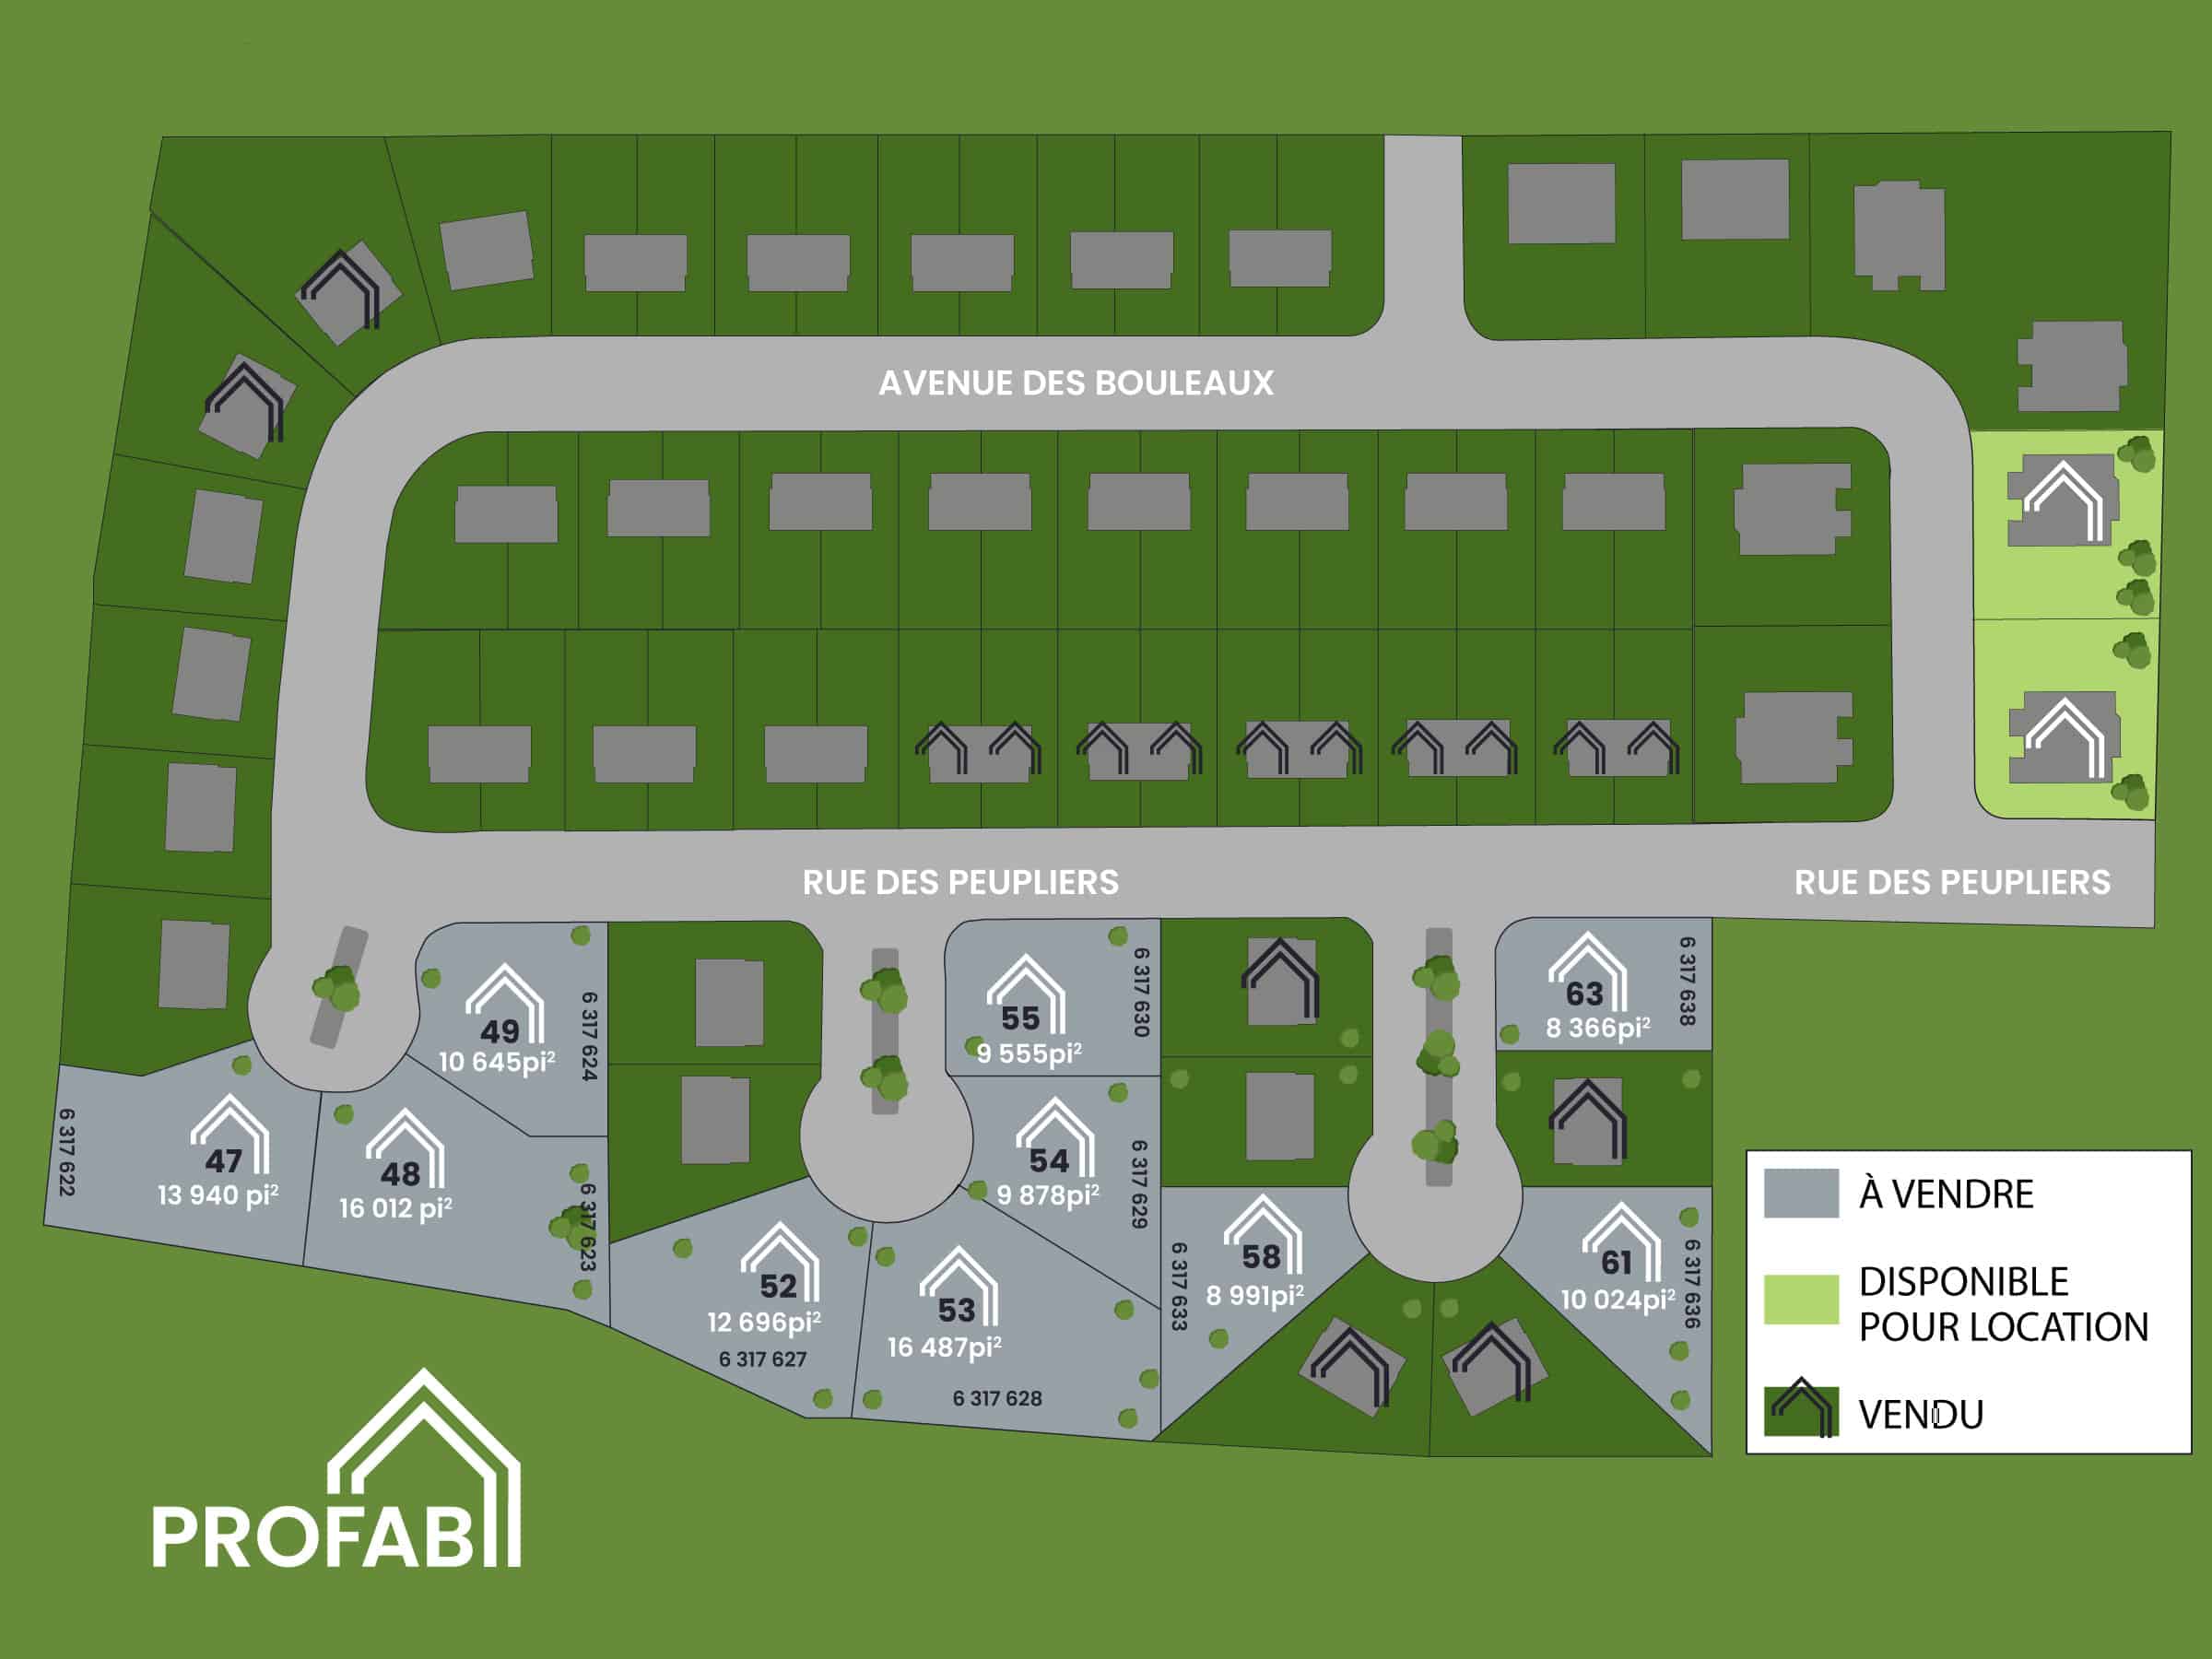 Vallée jonction subdivision plan. Vacant lot number 58 for sale.